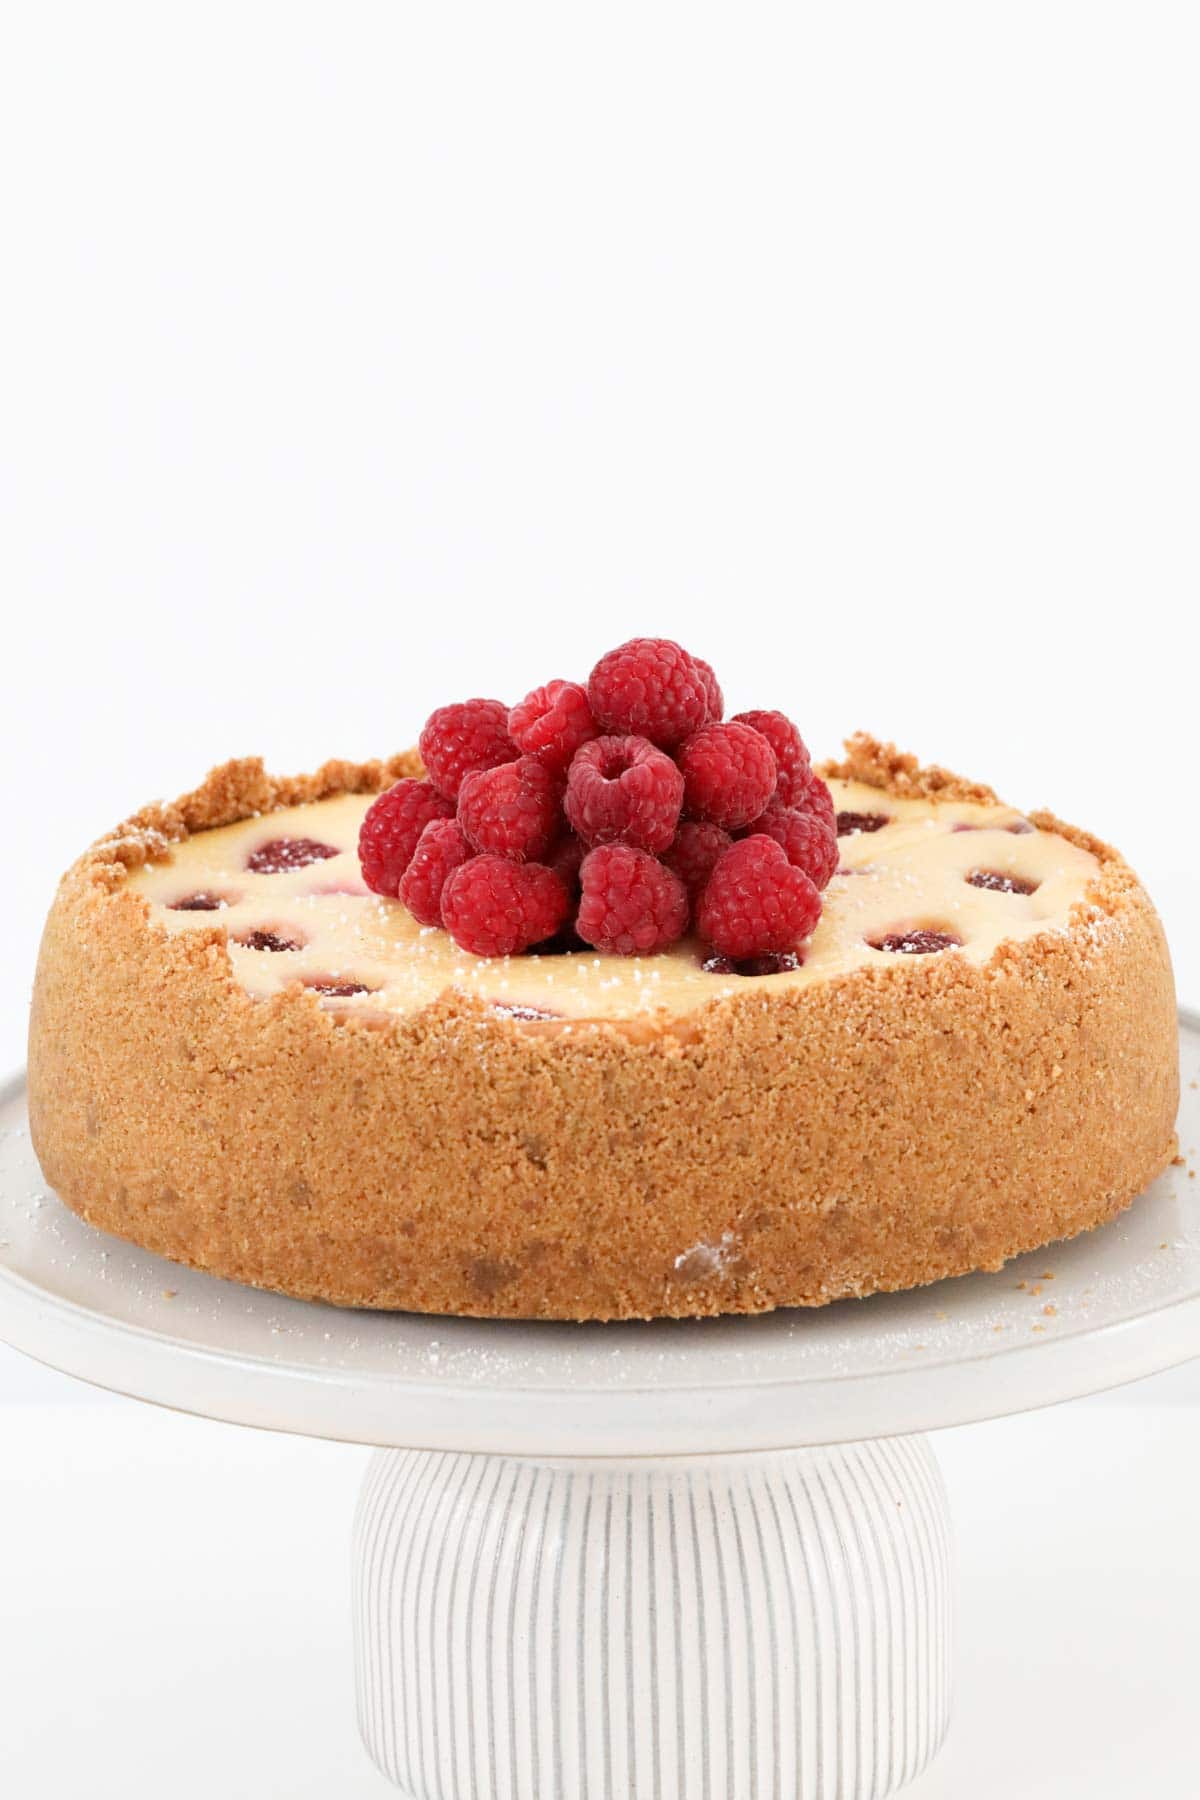 A raspberry baked cheesecake on a white cake stand.